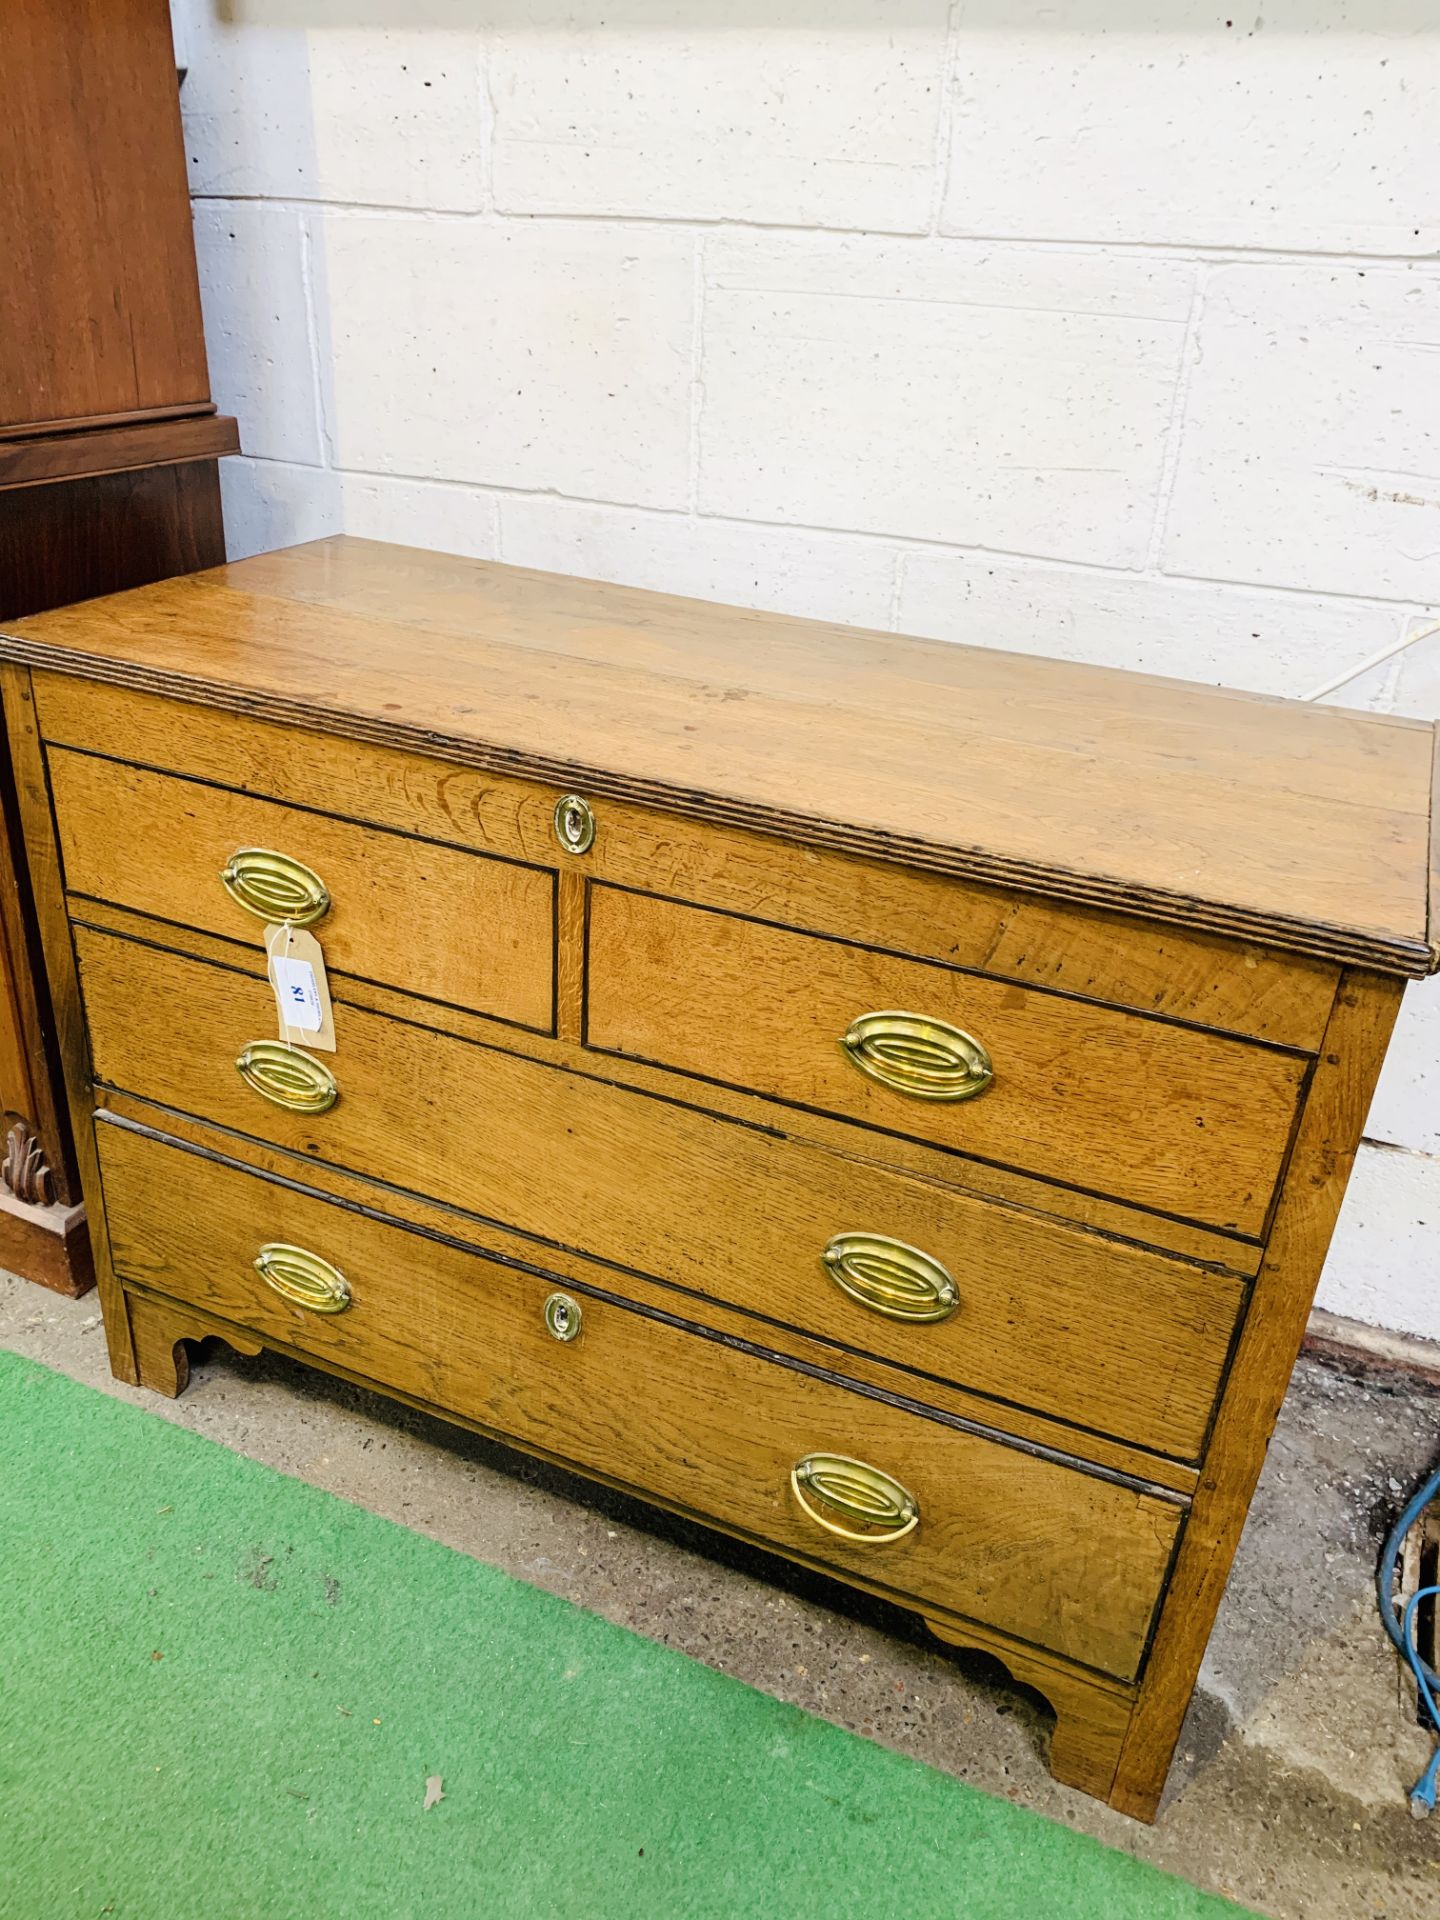 Oak former chest of 2 over 2 drawers converted to a cabinet with lifting lid - Image 2 of 5